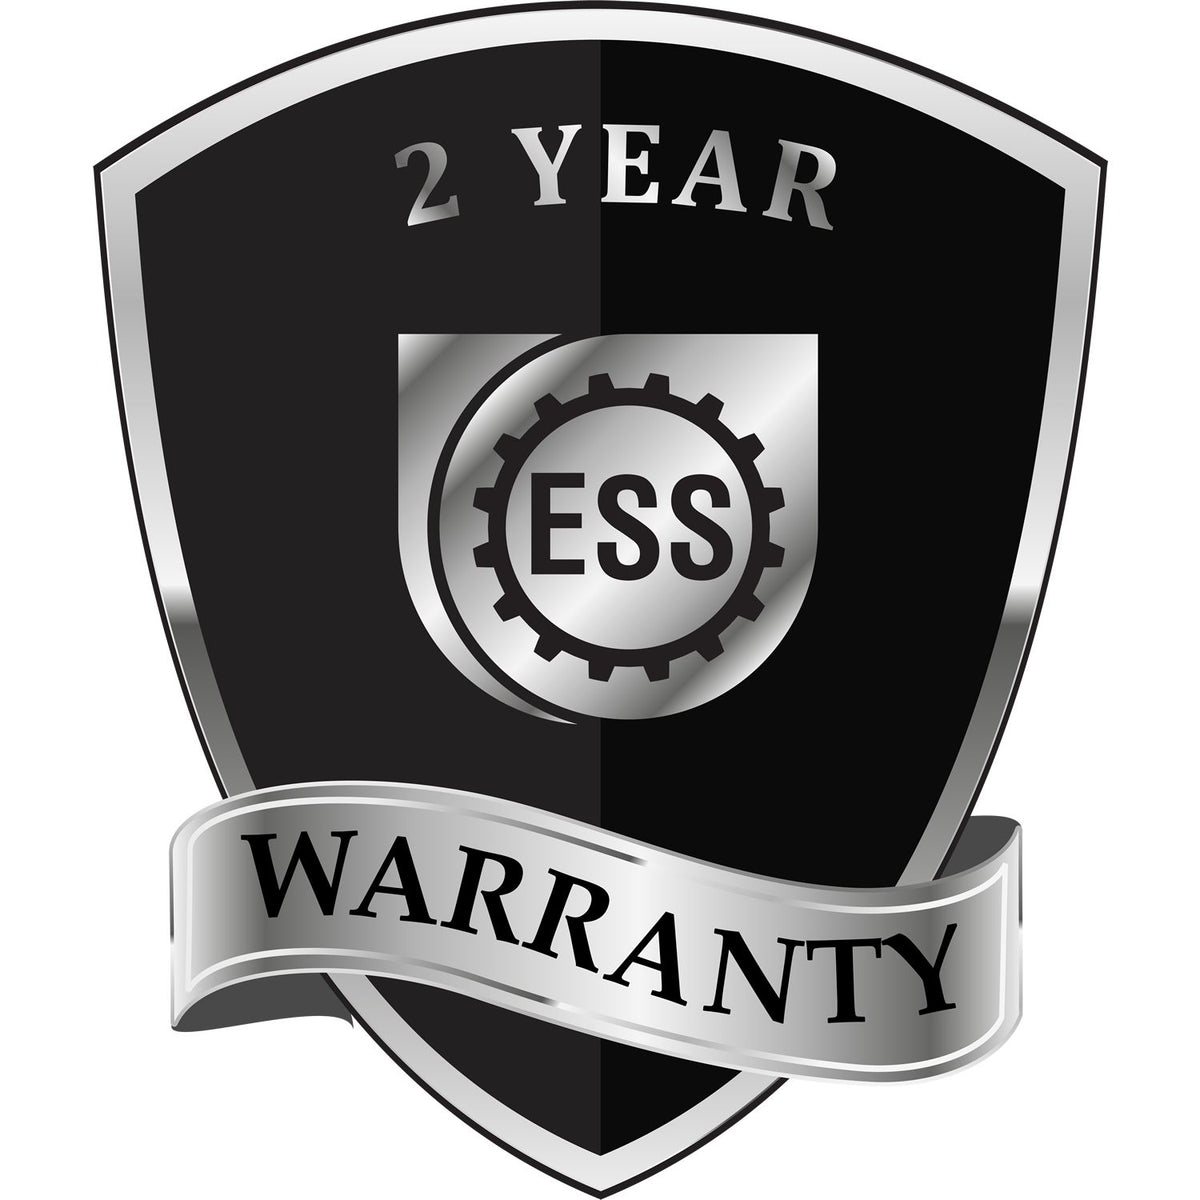 A black and silver badge or emblem showing warranty information for the Gift Arizona Architect Seal